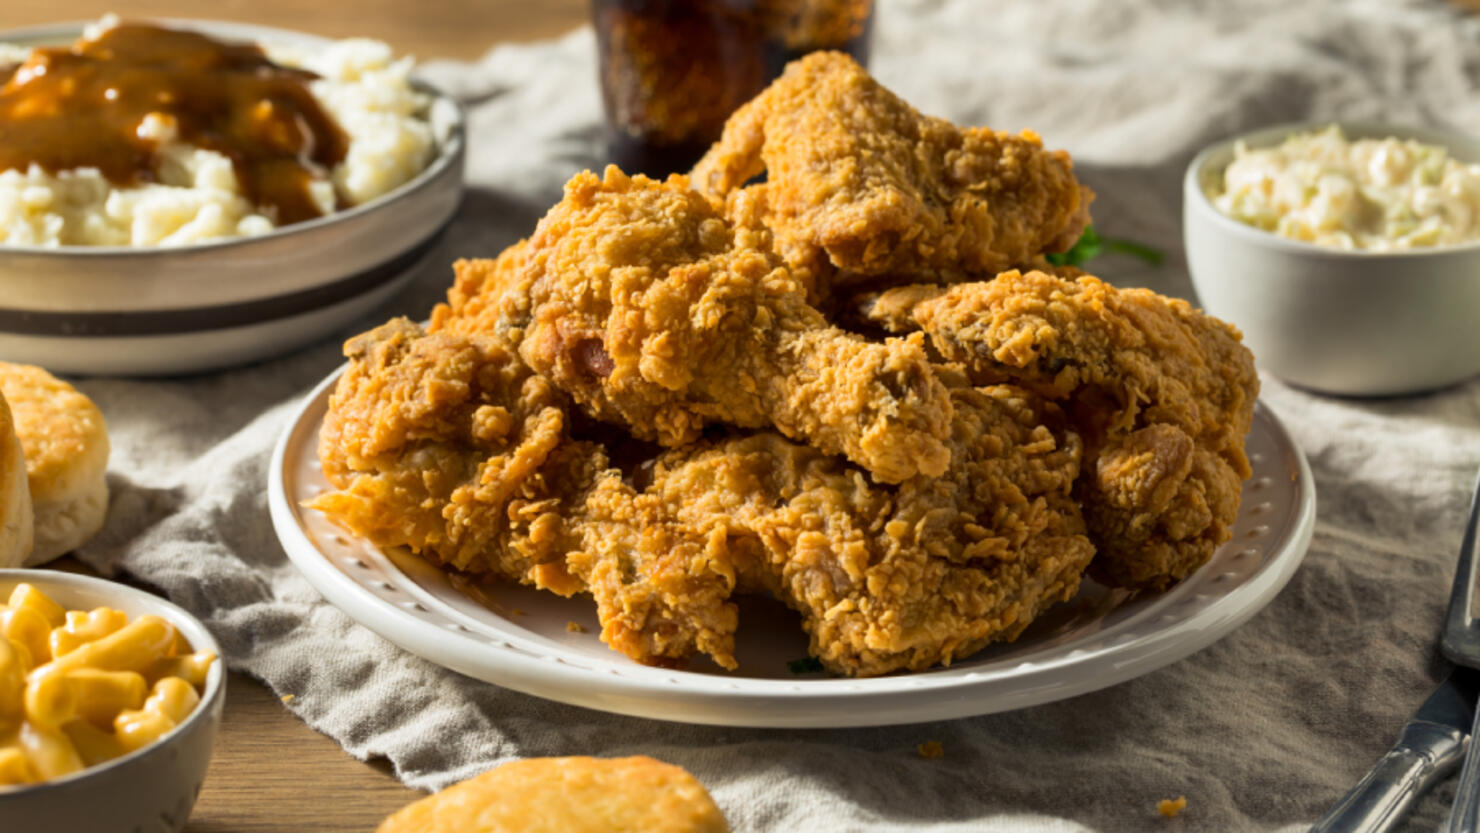 Louisiana Restaurant Named One Of The Best Spots For Fried Chicken | iHeart